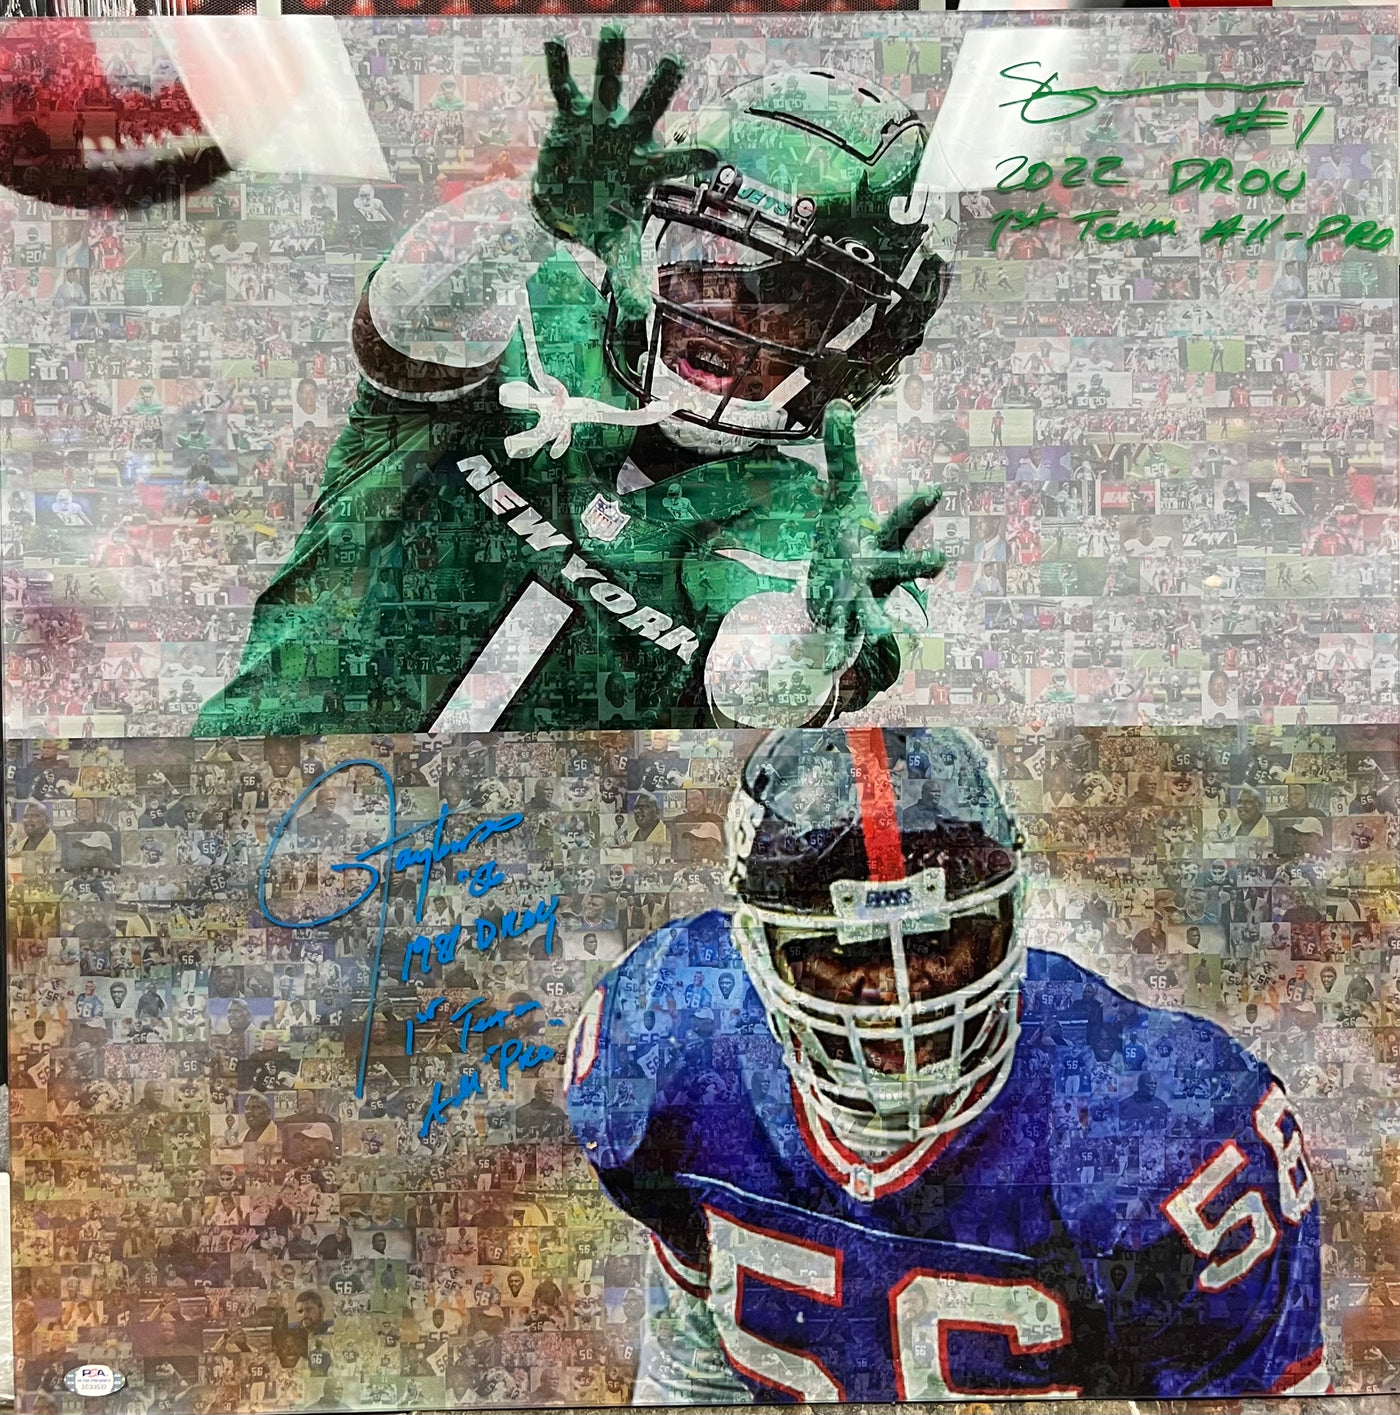 Sauce Gardner/Lawrence Taylor Dual Autographed/Inscripted Mosaic Print Version 2